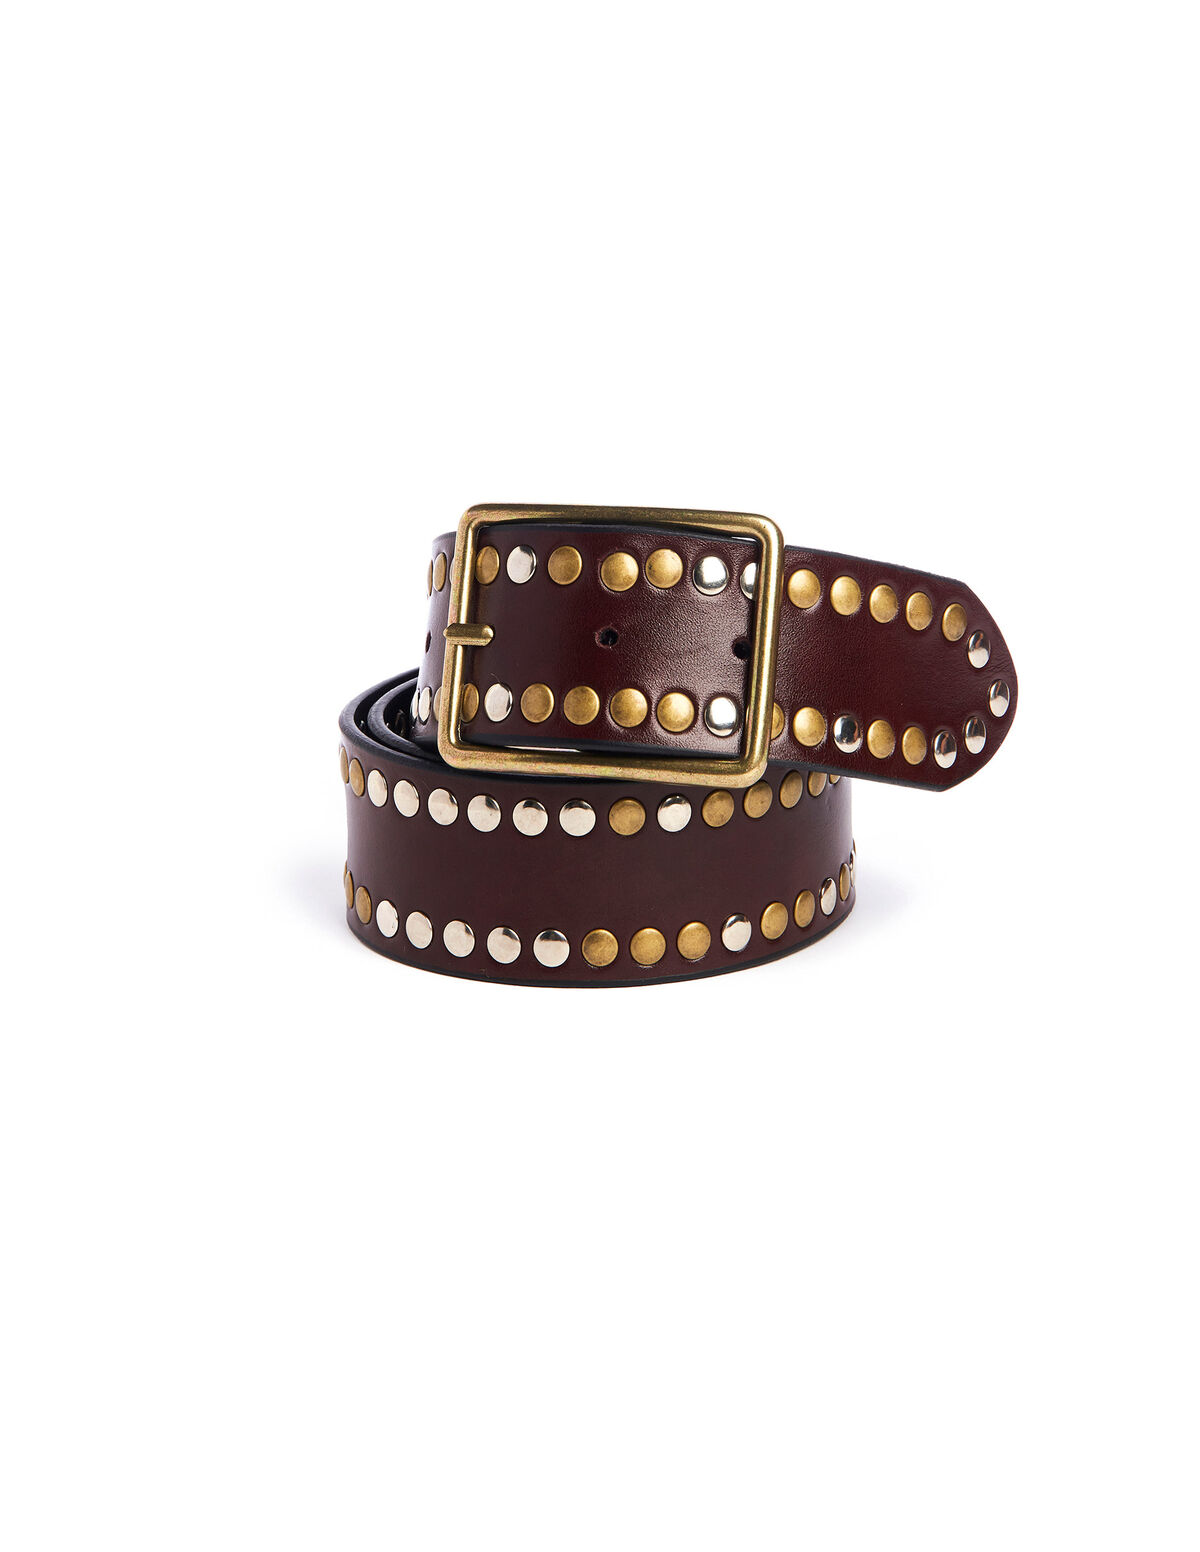 Brown leather two-tone studs belt gold buckle - Continuidad - Nícoli